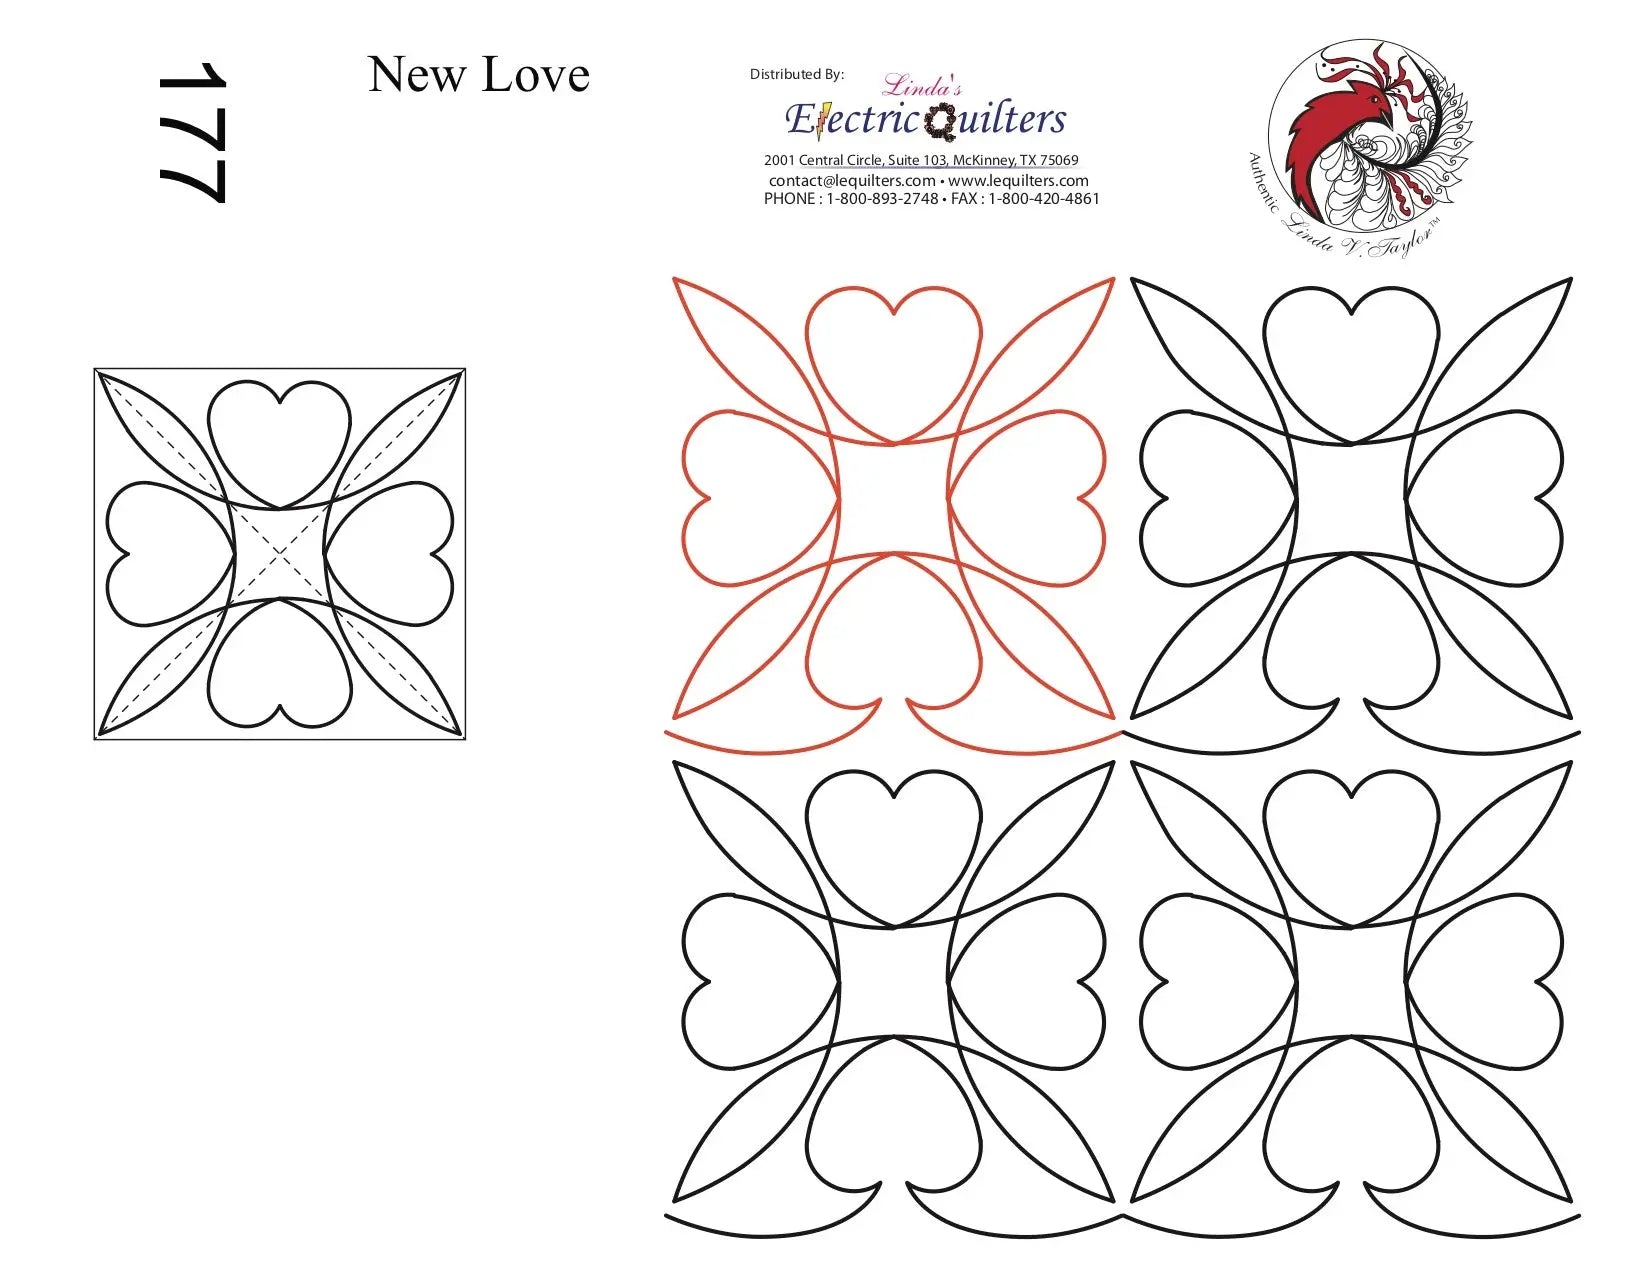 177 New Love Pantograph with Blocks by Linda V. Taylor - Linda's Electric Quilters